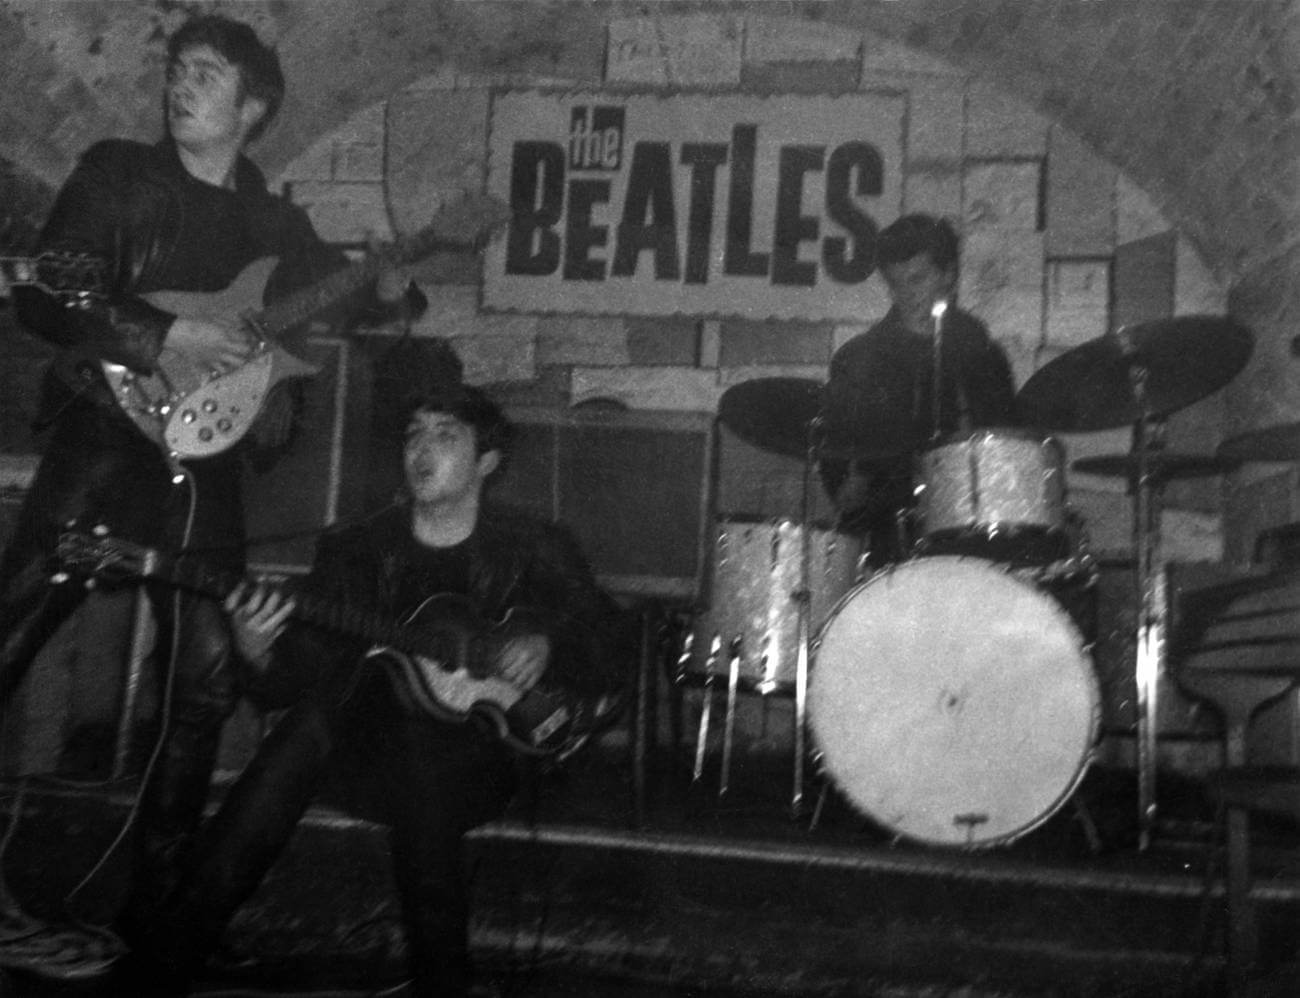 Paul McCartney performing with The Beatles at The Cavern Club in the early 1960s.